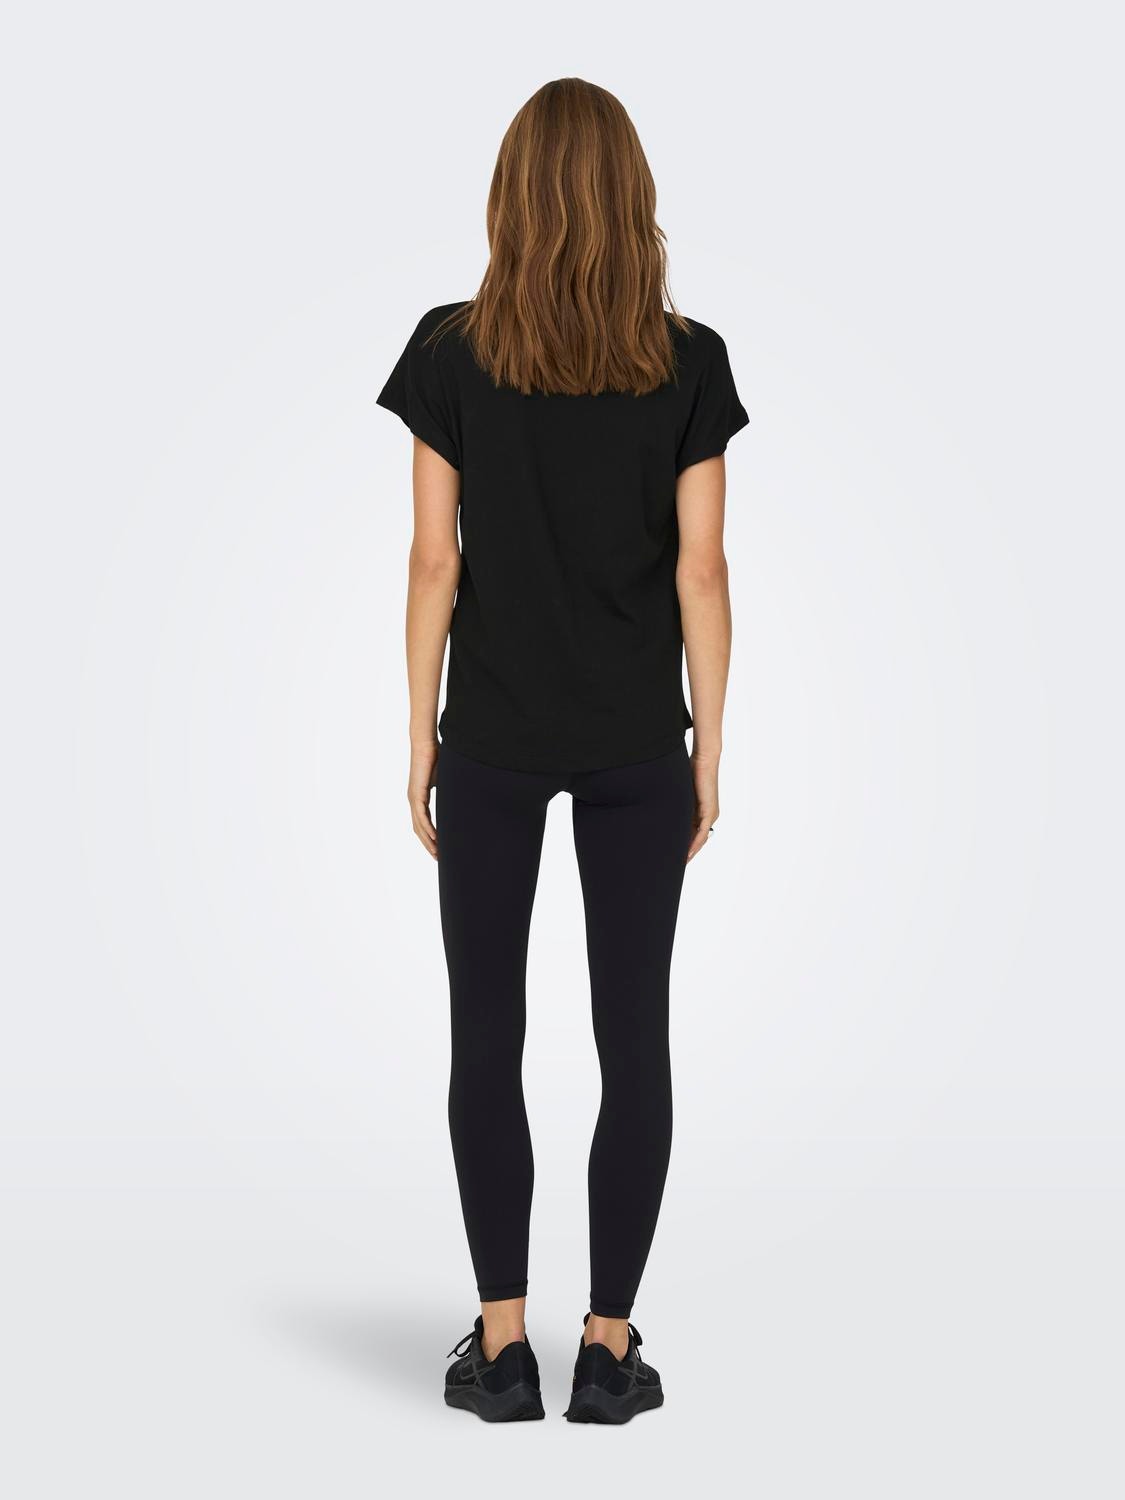 ONLY Loose Fit Round Neck T-Shirt -Black - 15297020